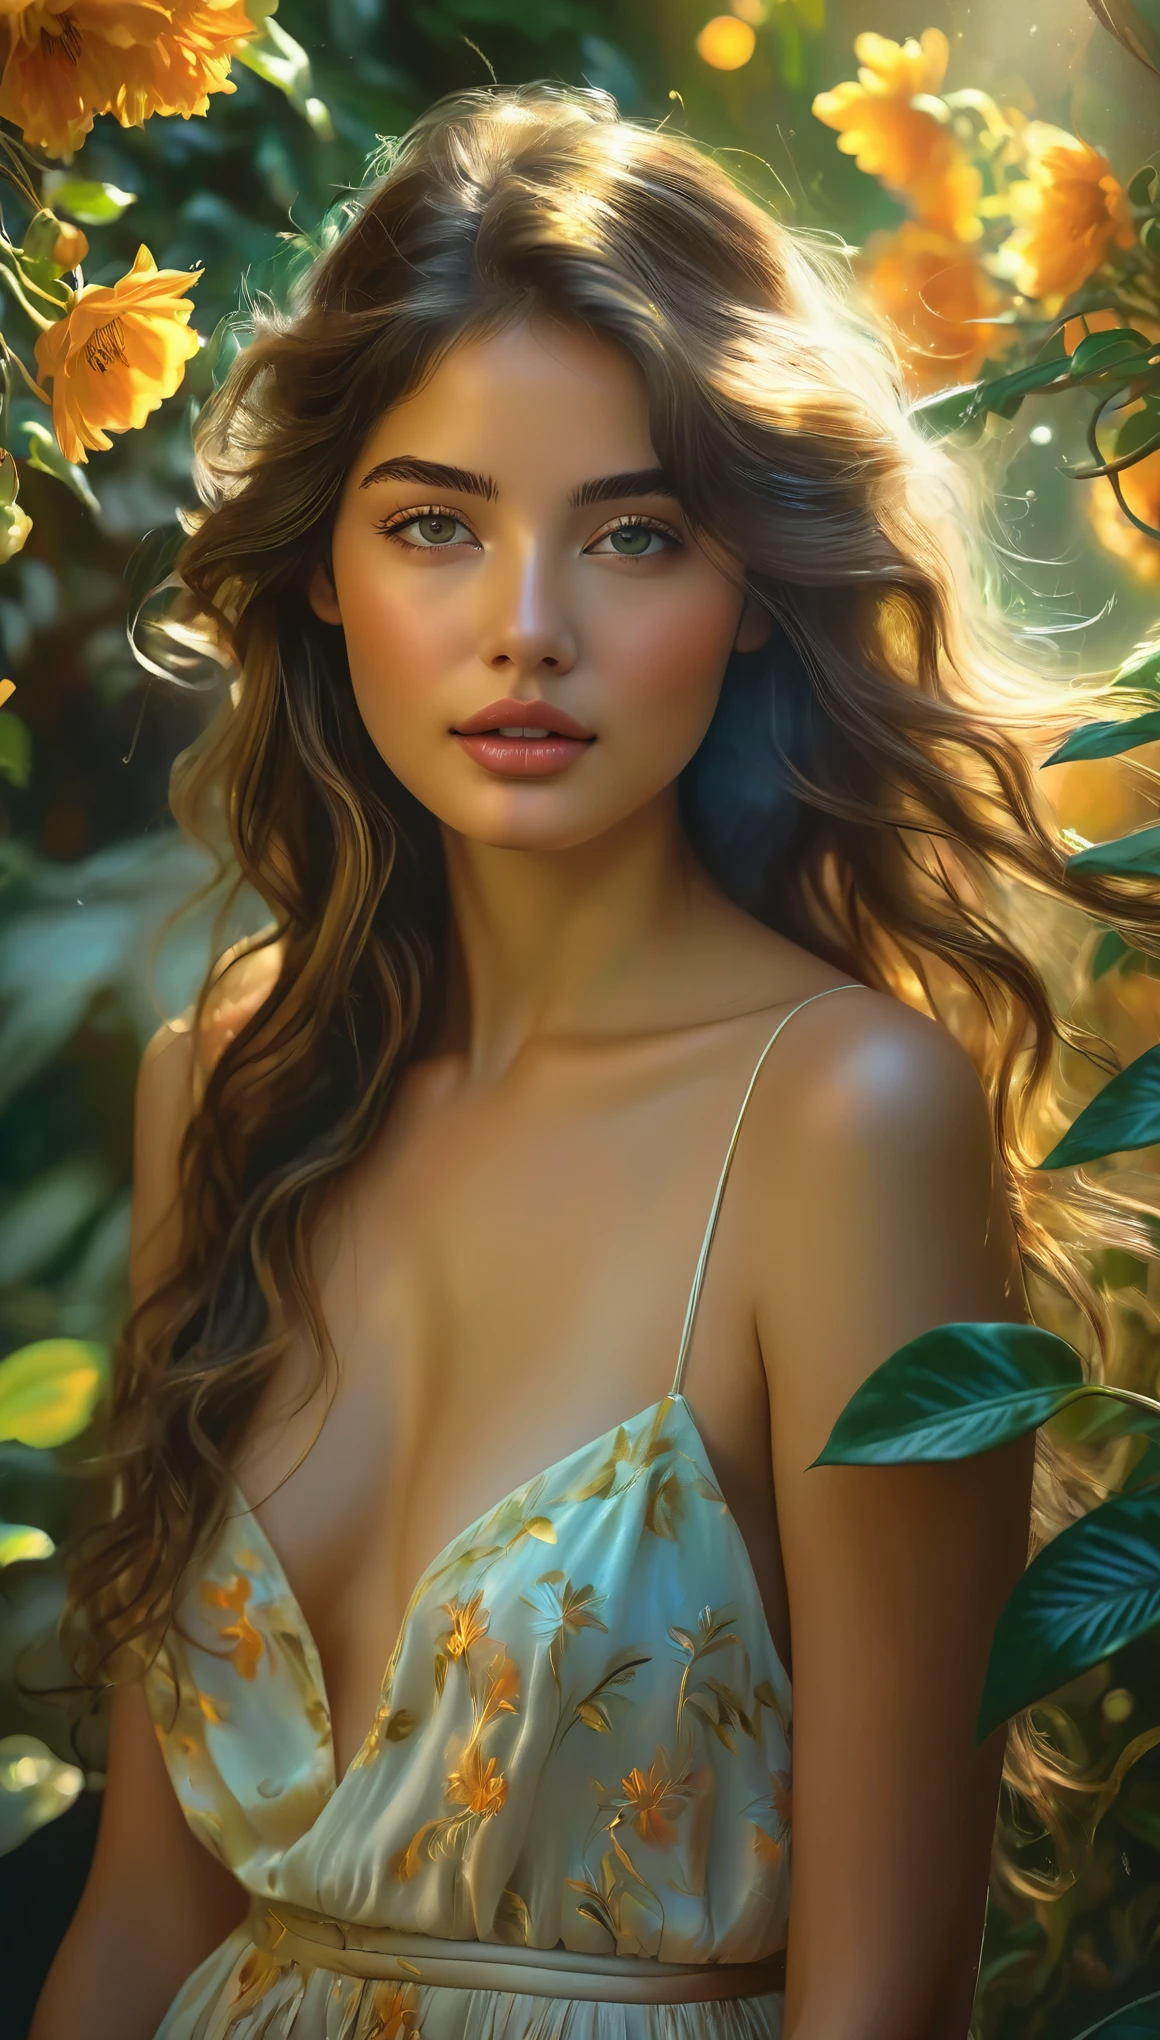 (best quality, highres, ultra-detailed, realistic:1.37), a 16yo exotic half Italian girl with breathtaking beauty under the dappled sunlight, a nude art piece in the style of photo, depicted with stunning realism and intricate details. The girl has porcelain-like skin, radiant with a soft glow. Her mesmerizing iridescent eyes are filled with depth and emotion, enhanced with long, dark lashes. Her full, luscious lips are delicately painted with a hint of natural color. Long, flowing locks of hair cascade down her back, catching the gentle rays of sunlight.

The girl stands gracefully in a picturesque garden, surrounded by vibrant flowers and lush green foliage. The warm golden sunlight filters through the branches, casting enchanting shadows on her flawless form. The scene exudes a sense of tranquility and serenity, as if time has momentarily stood still.

The textures of the flowers and leaves are rendered with rich colors and intricate details, bringing them to life on the canvas. The overall composition showcases a harmonious balance between light and shadow, accentuating the girl's ethereal beauty.

The color palette of the painting is dominated by warm tones, with hints of soft pastels to add a touch of whimsy. The sunlight bathes the scene in a warm, golden glow, illuminating the girl's fair complexion and casting a soft, romantic atmosphere.

The lighting in the artwork is carefully crafted, emphasizing the natural play of light and shadow. The subtle interplay of highlights and shadows enhances the depth and dimensionality of the girl's figure, adding a sense of realism to the painting. The soft, diffused light further enhances the dreamlike quality of the scene, creating a magical and captivating ambiance.

The resulting artwork is a masterpiece of beauty and artistry, capturing the essence of a girl's innocence and vulnerability in a mesmerizing and timeless 